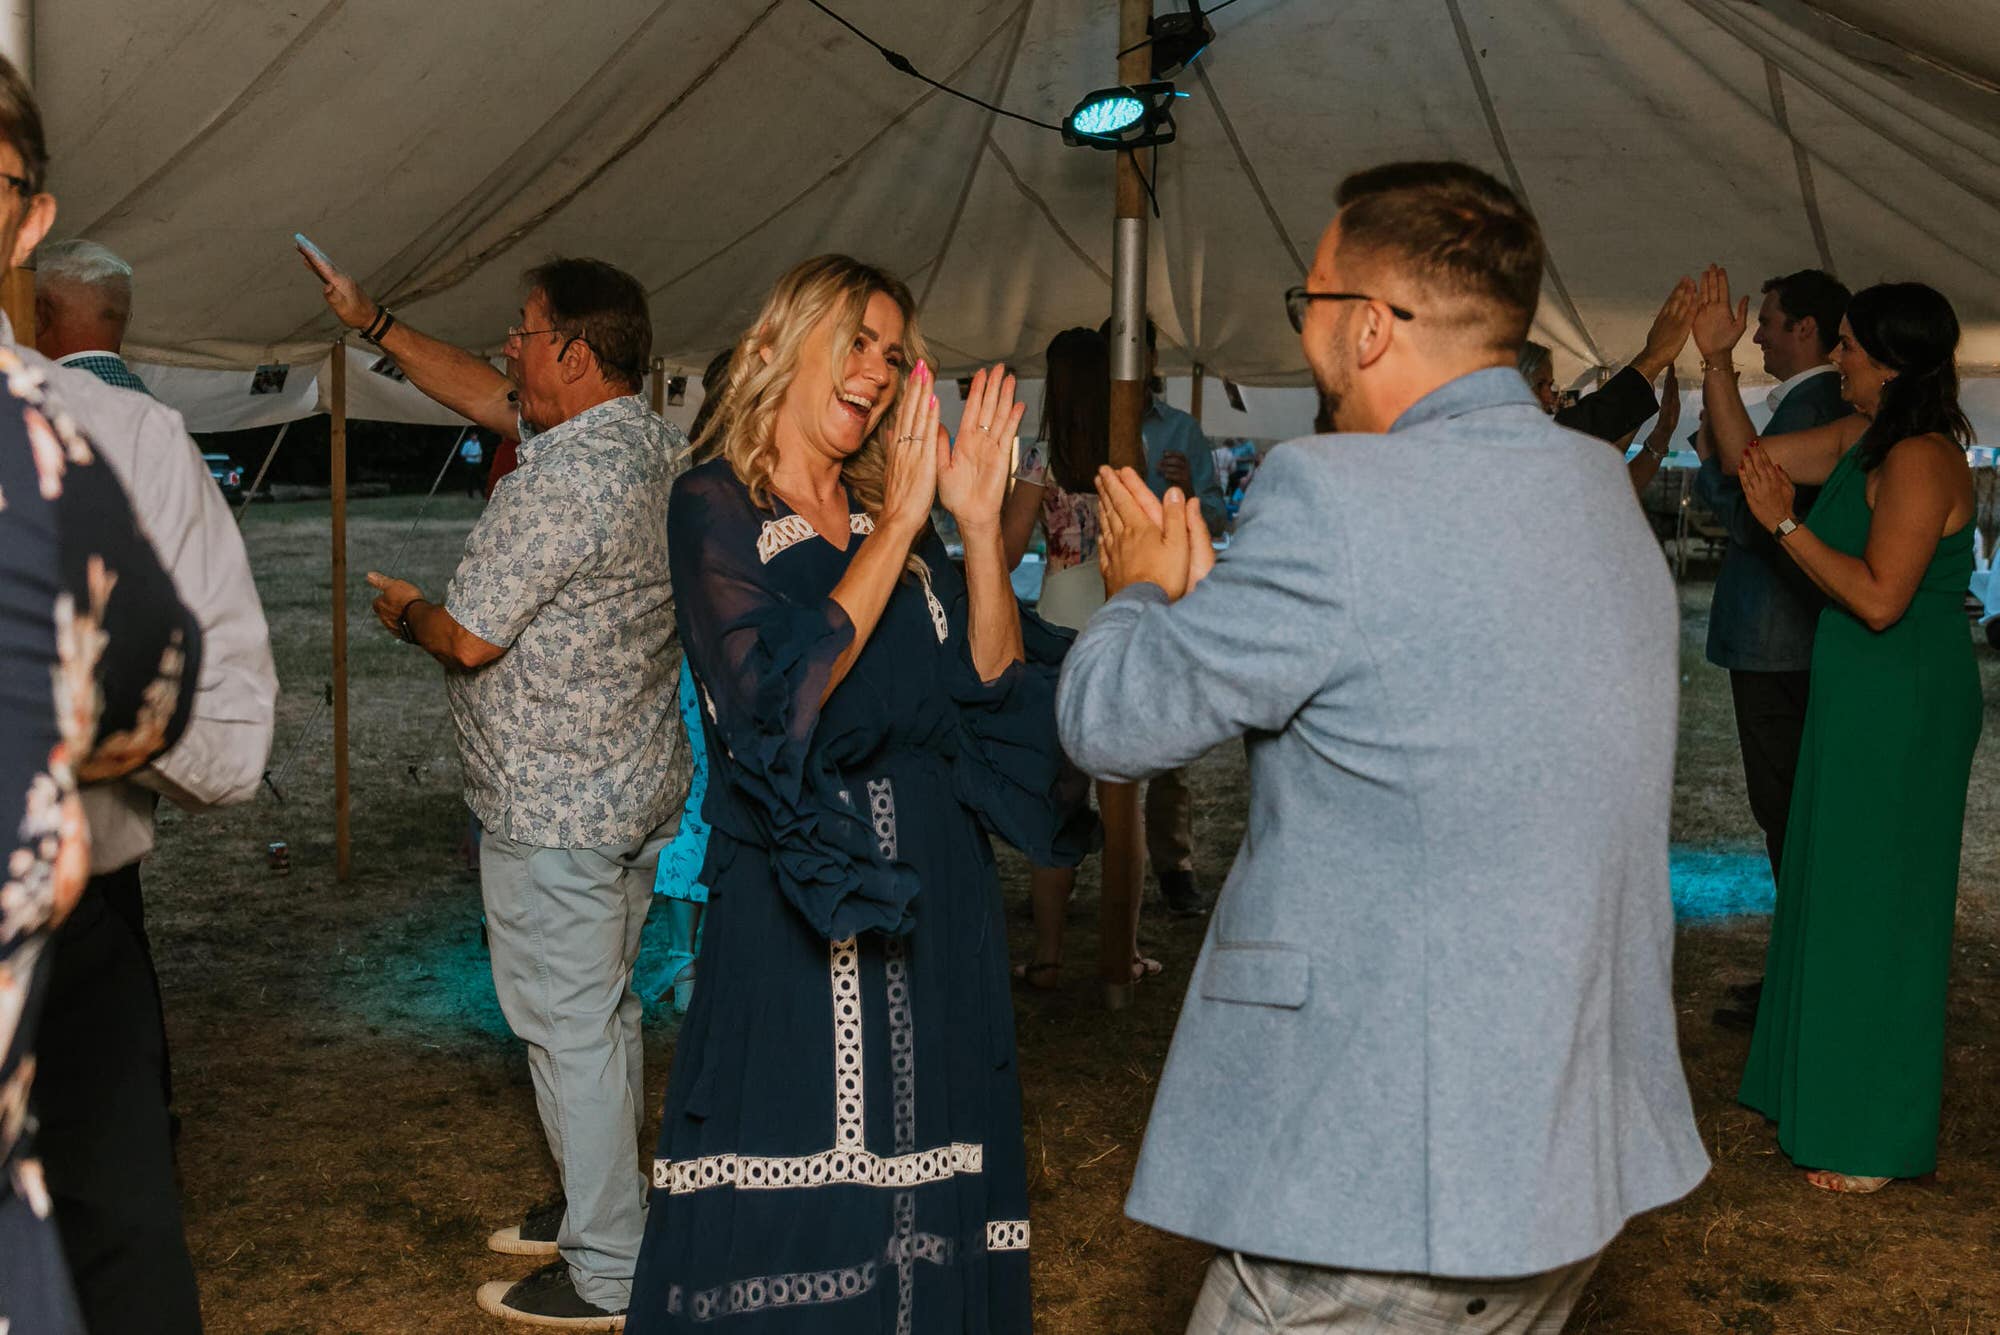 ceilidh dancing with the guests under a tipi